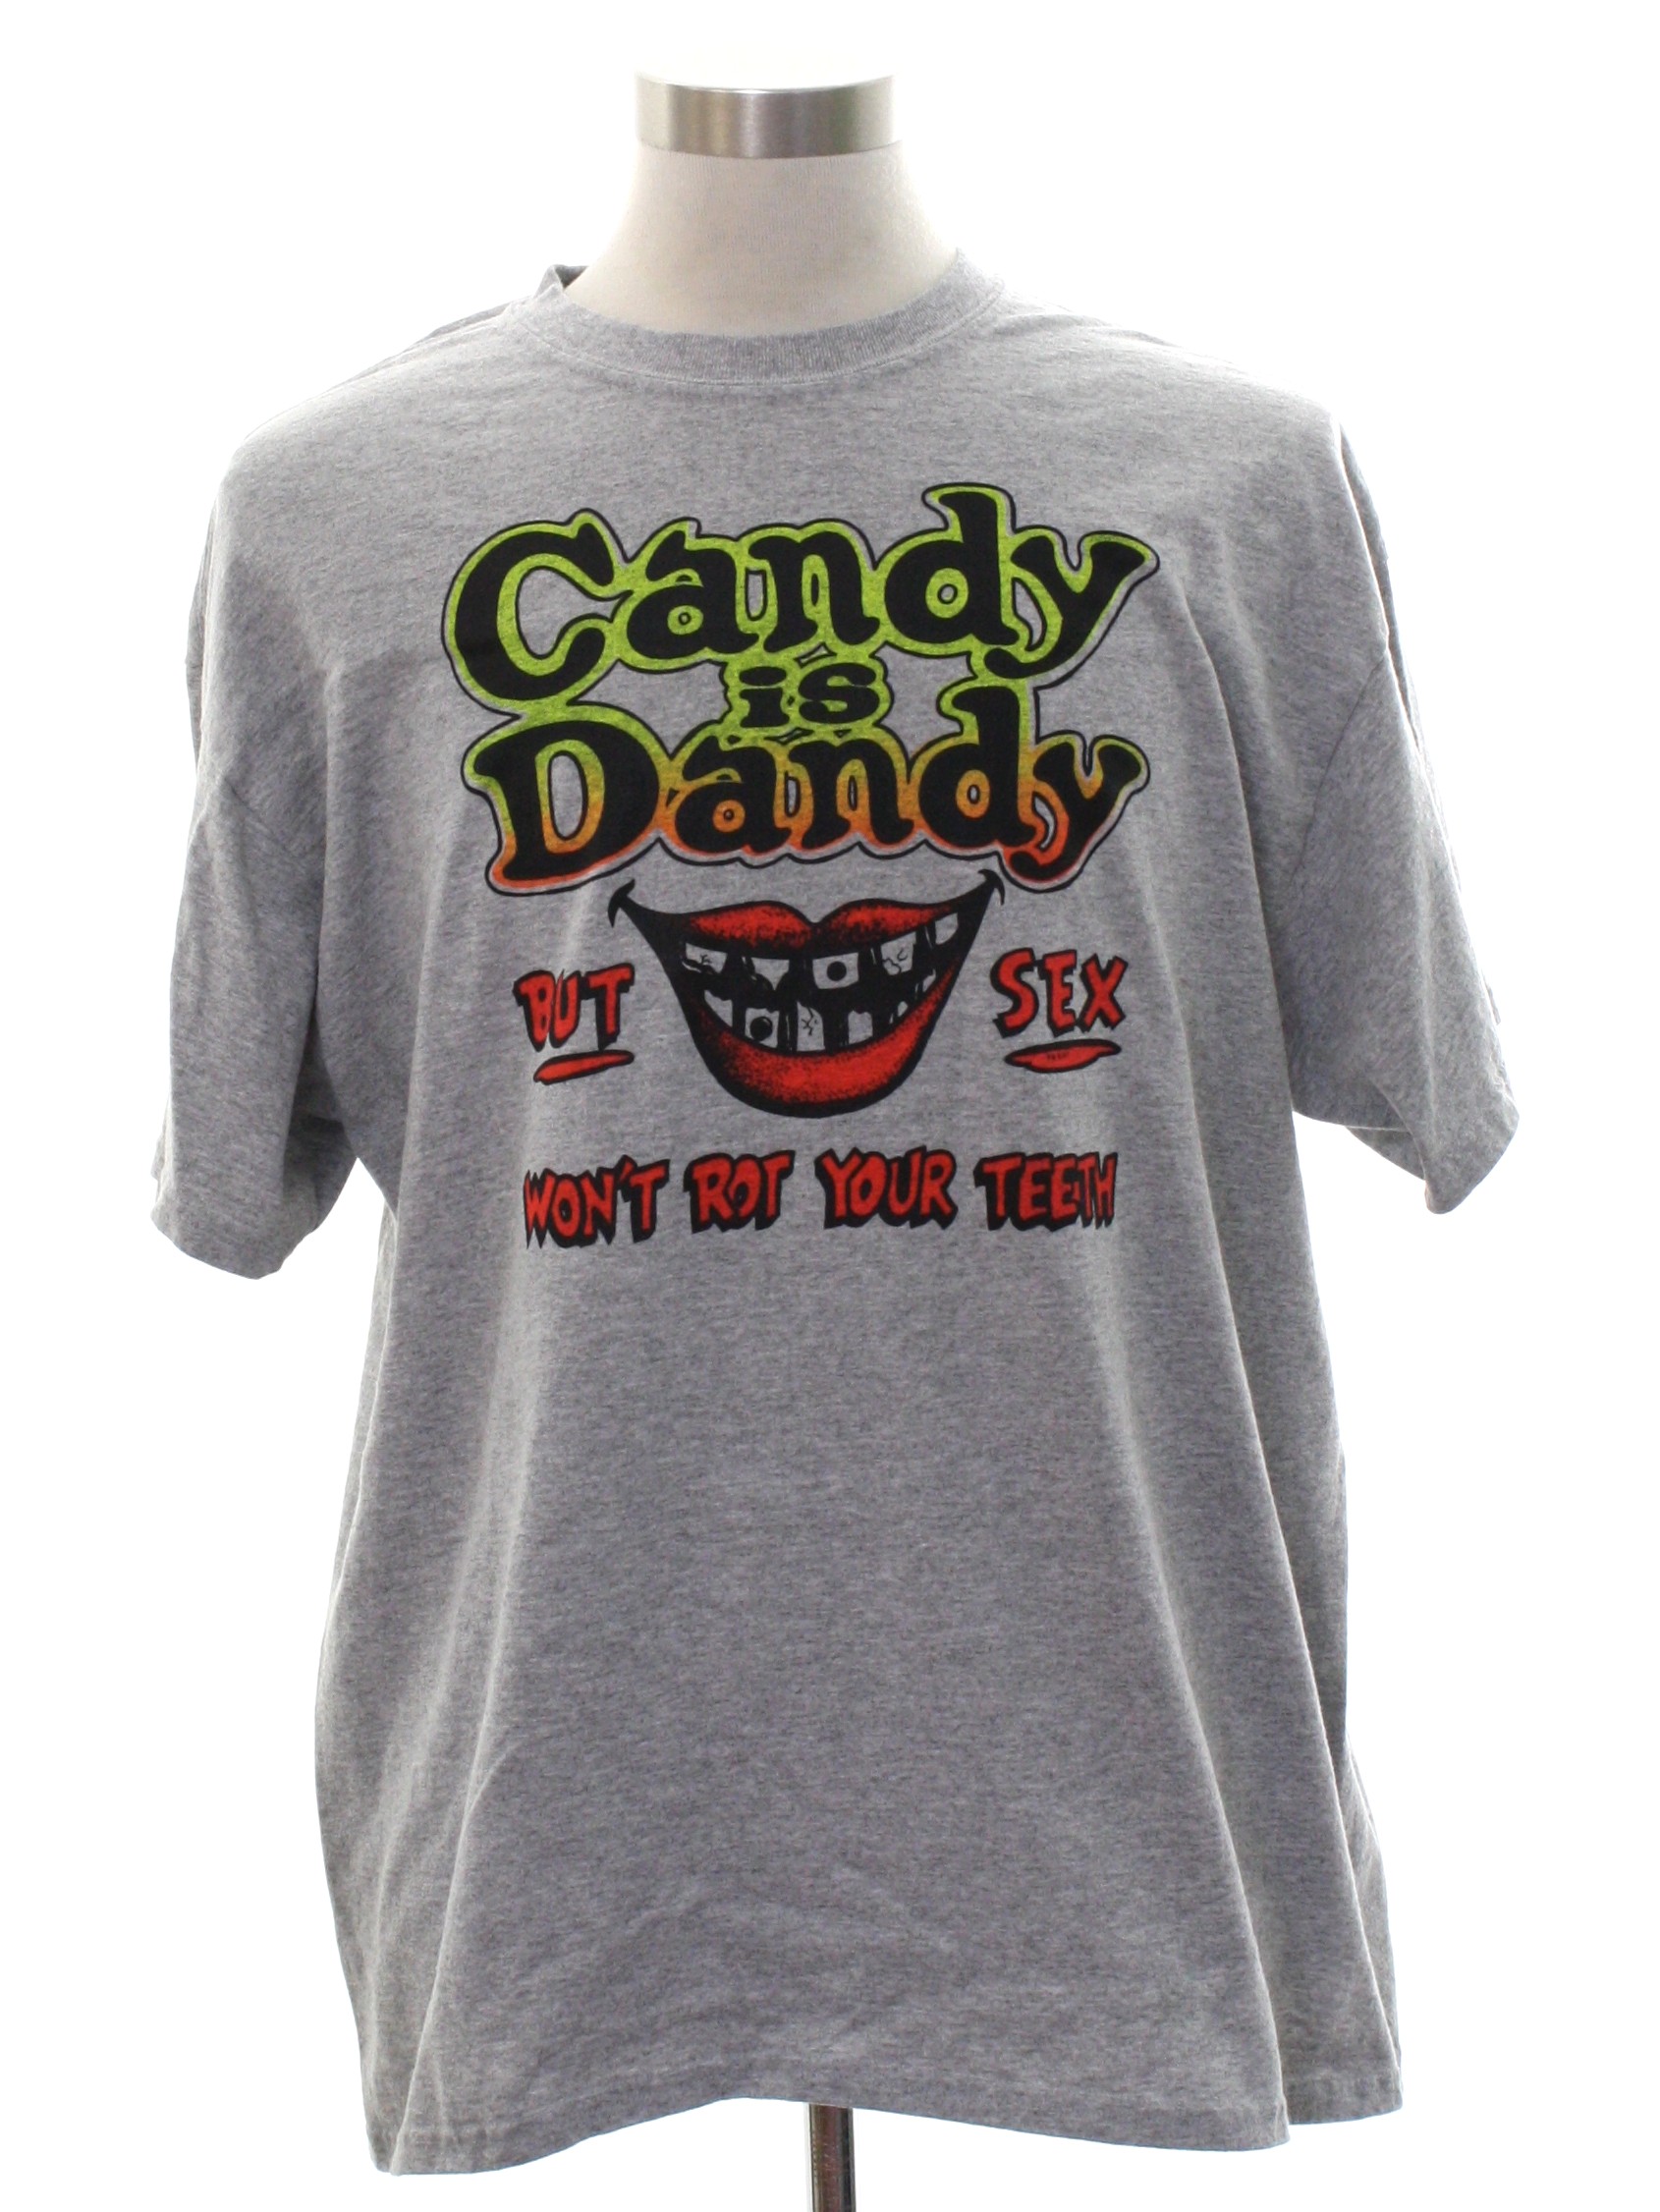 70 S Candy Is Dandy But Sex Wont Rot Your Teeth T Shirt Late 70s Or Early 80s Candy Is Dandy